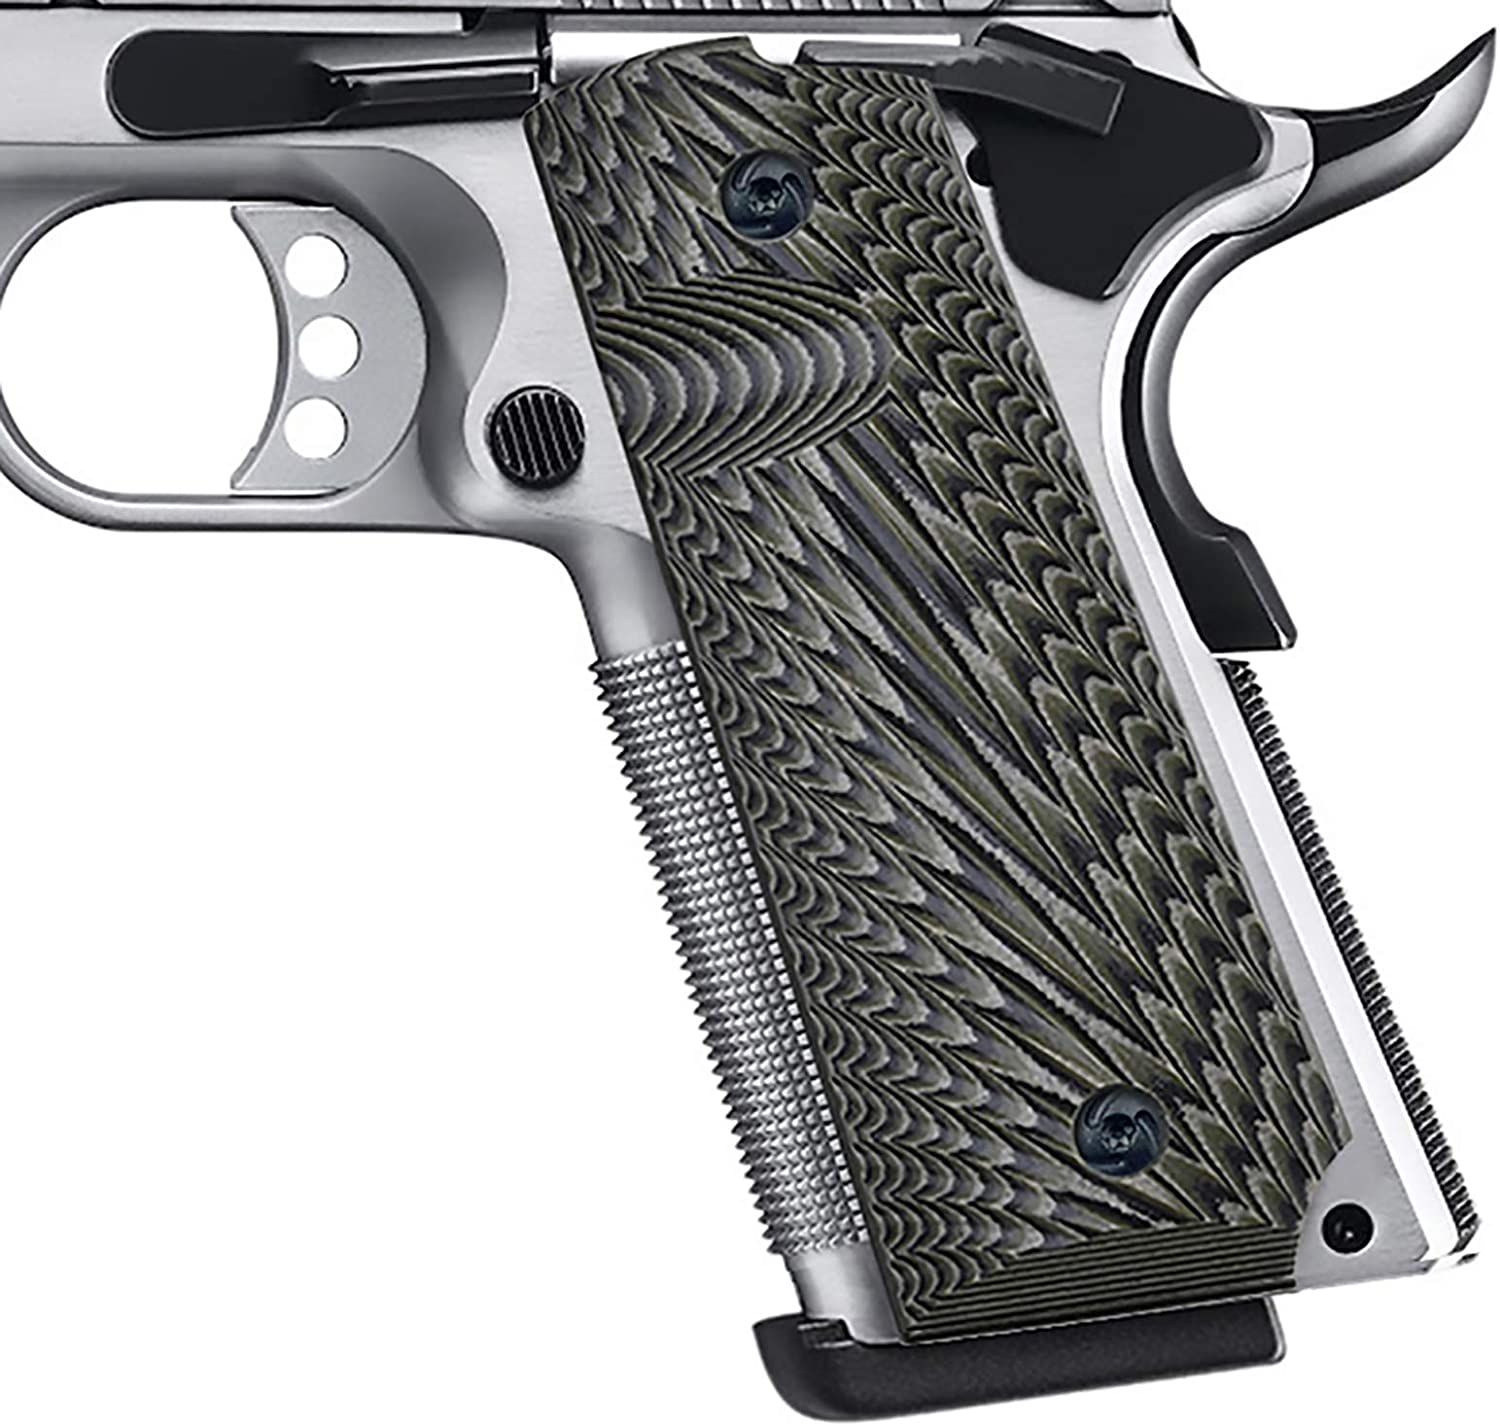 Guuun G10 Grips For 1911 - 6 color options - $18.99 with Coupon "XUFEE" 